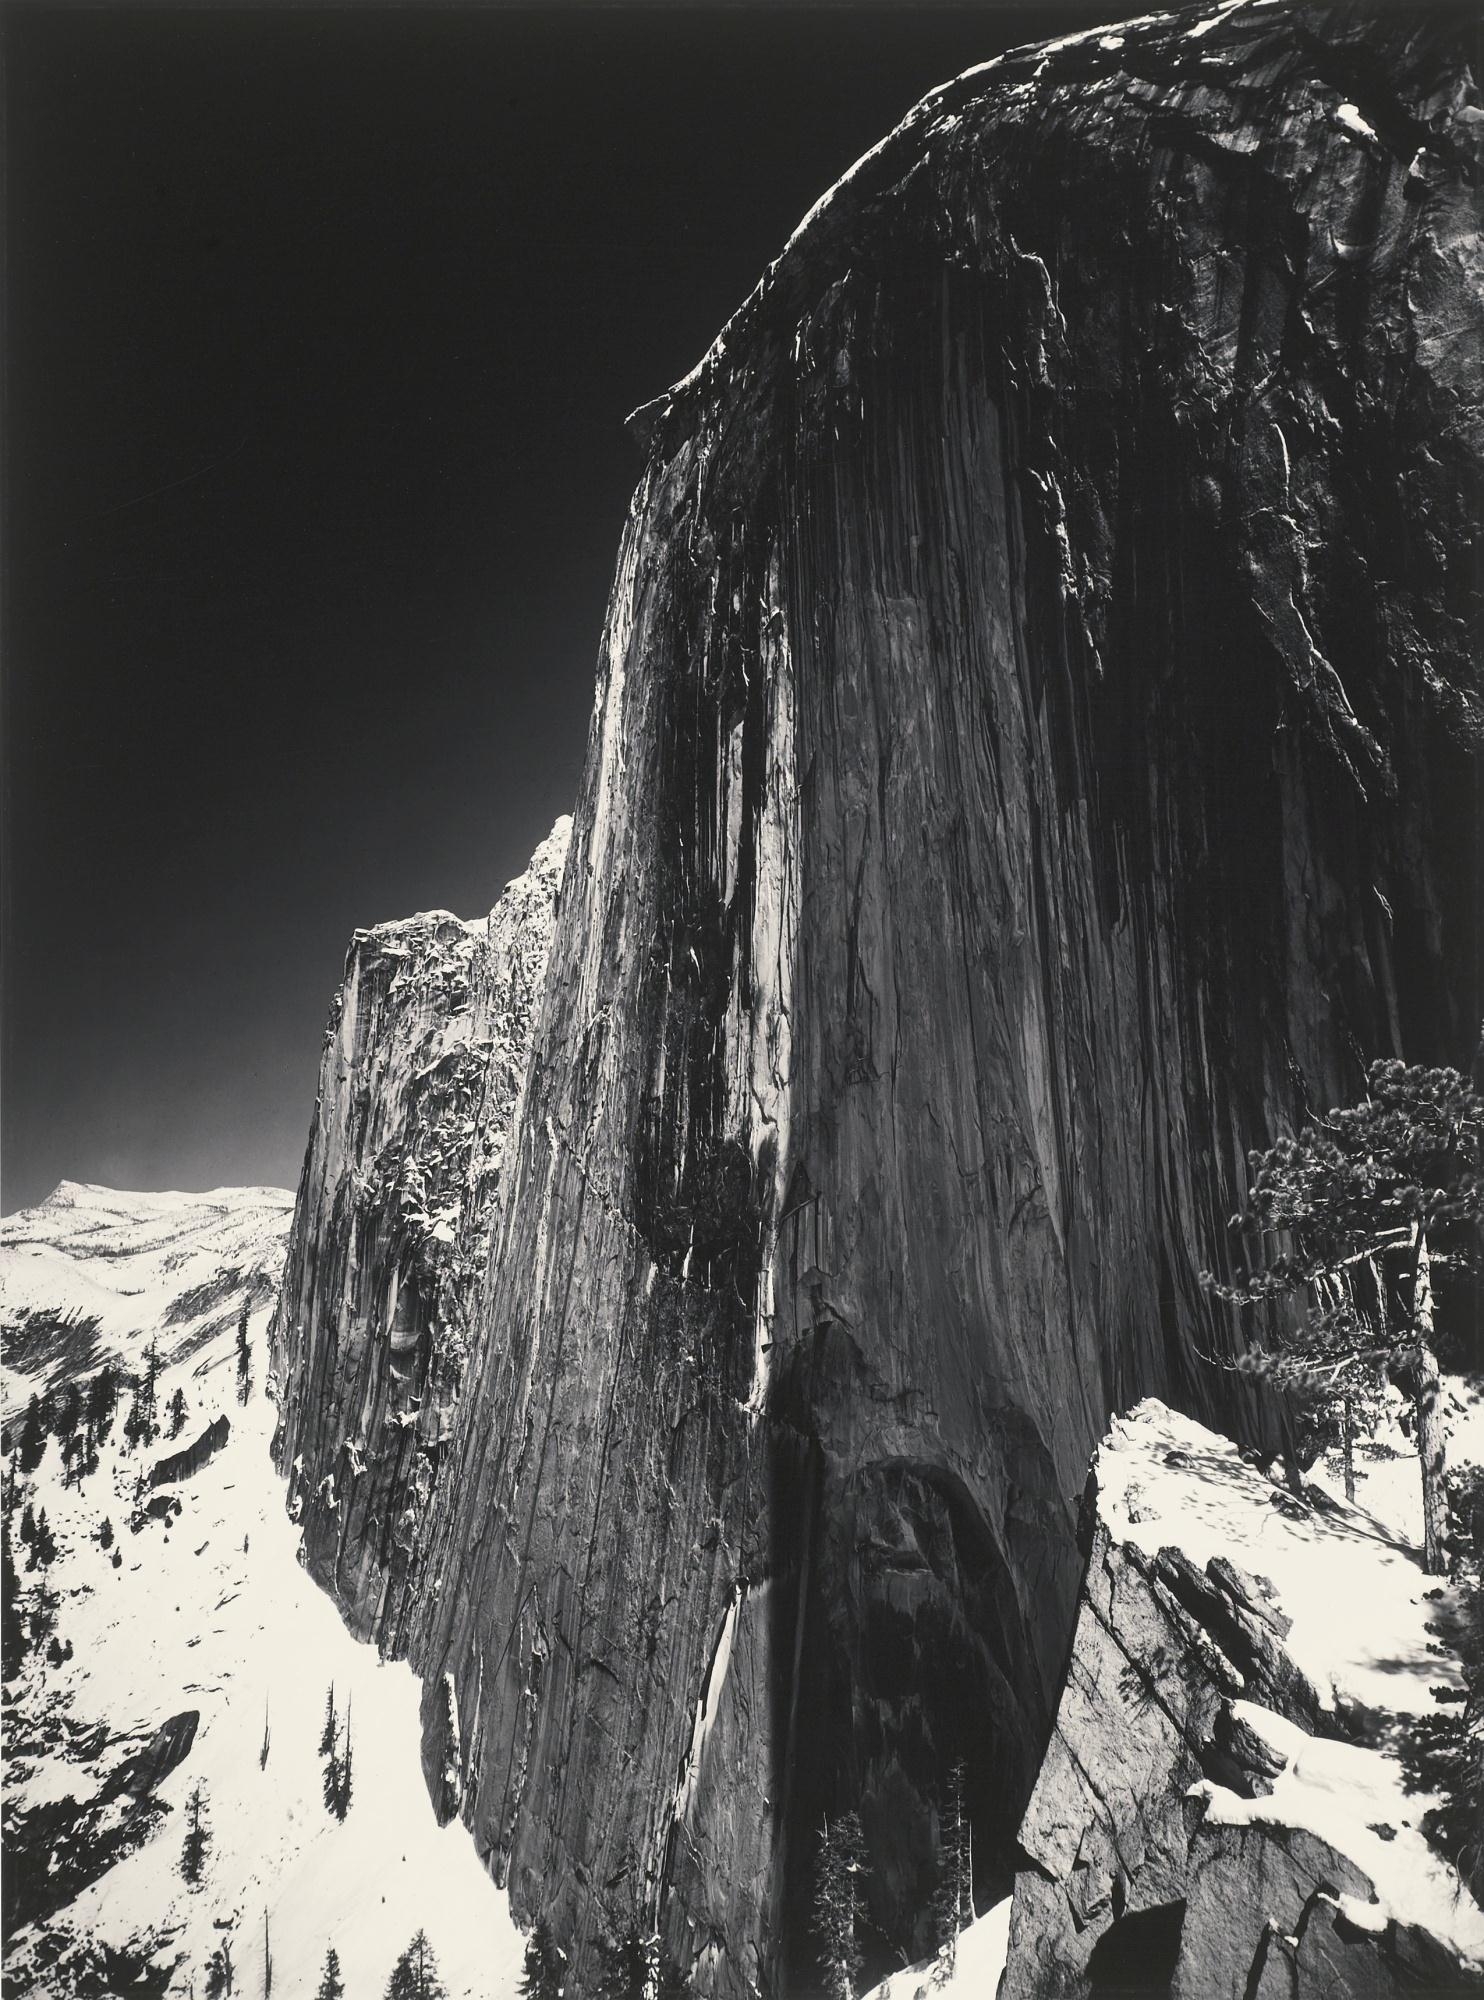 MONOLITH, THE FACE OF HALF DOME, YOSEMITE NATIONAL PARK, CA. by Ansel Adams, circa 1926